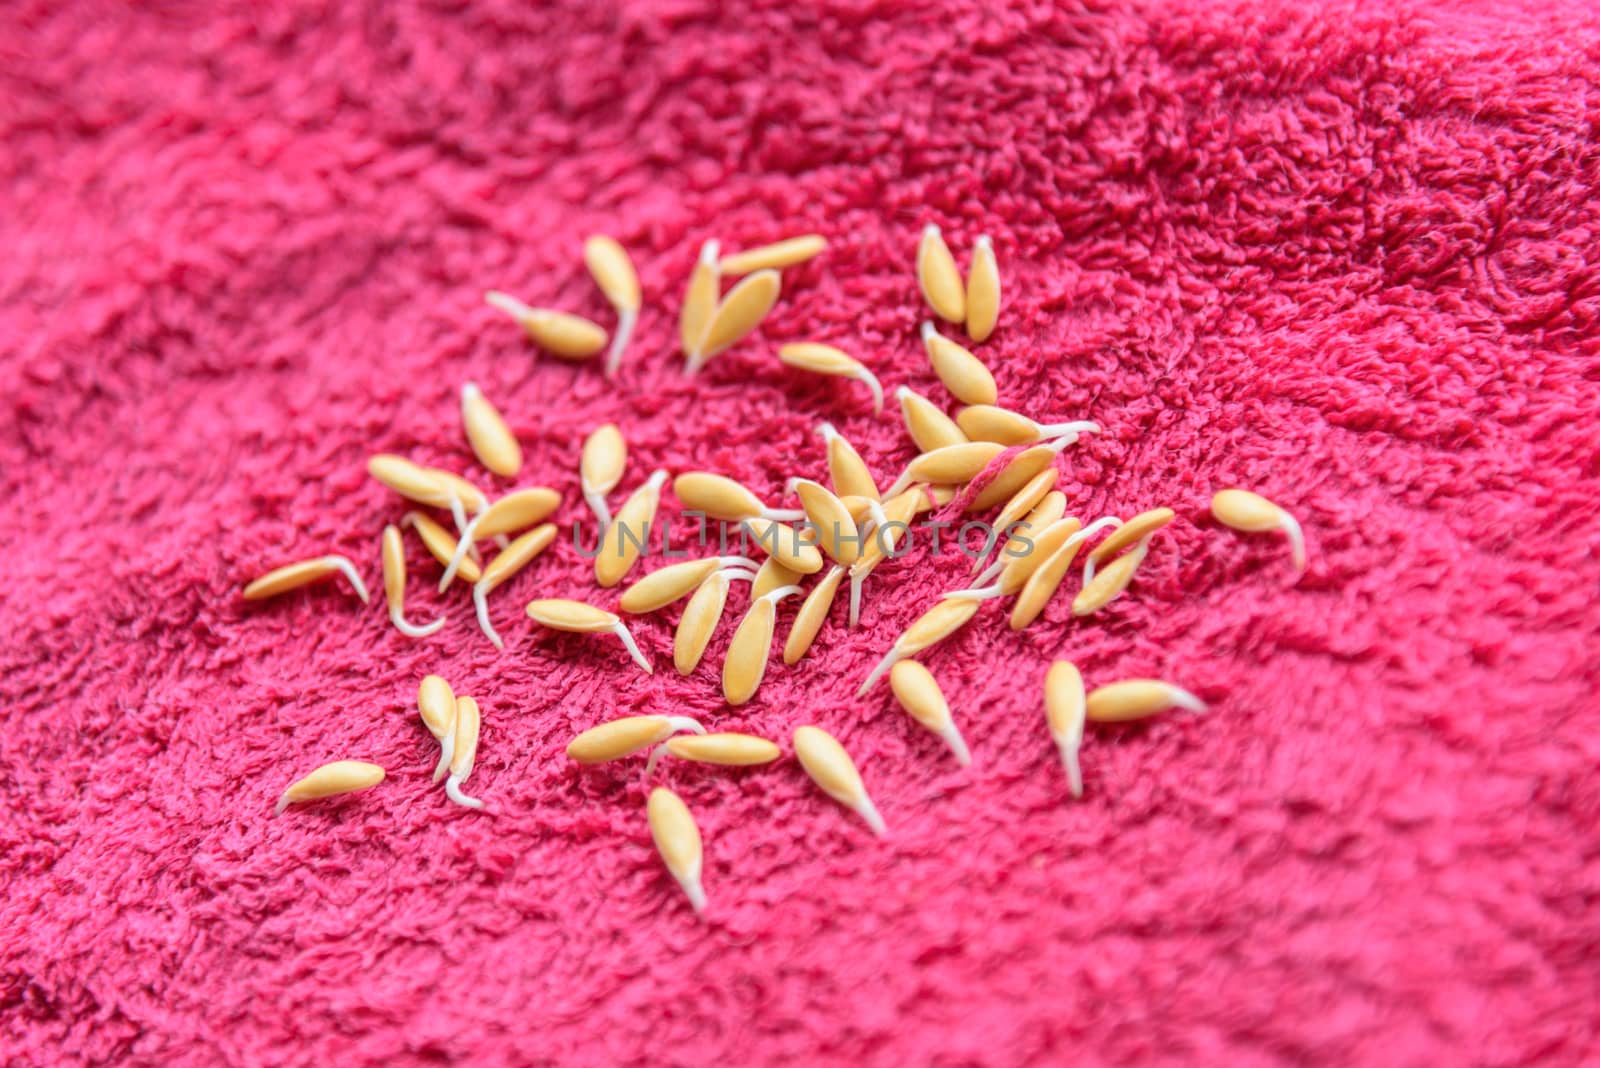 germinate melon Seed on pink cloth by rukawajung